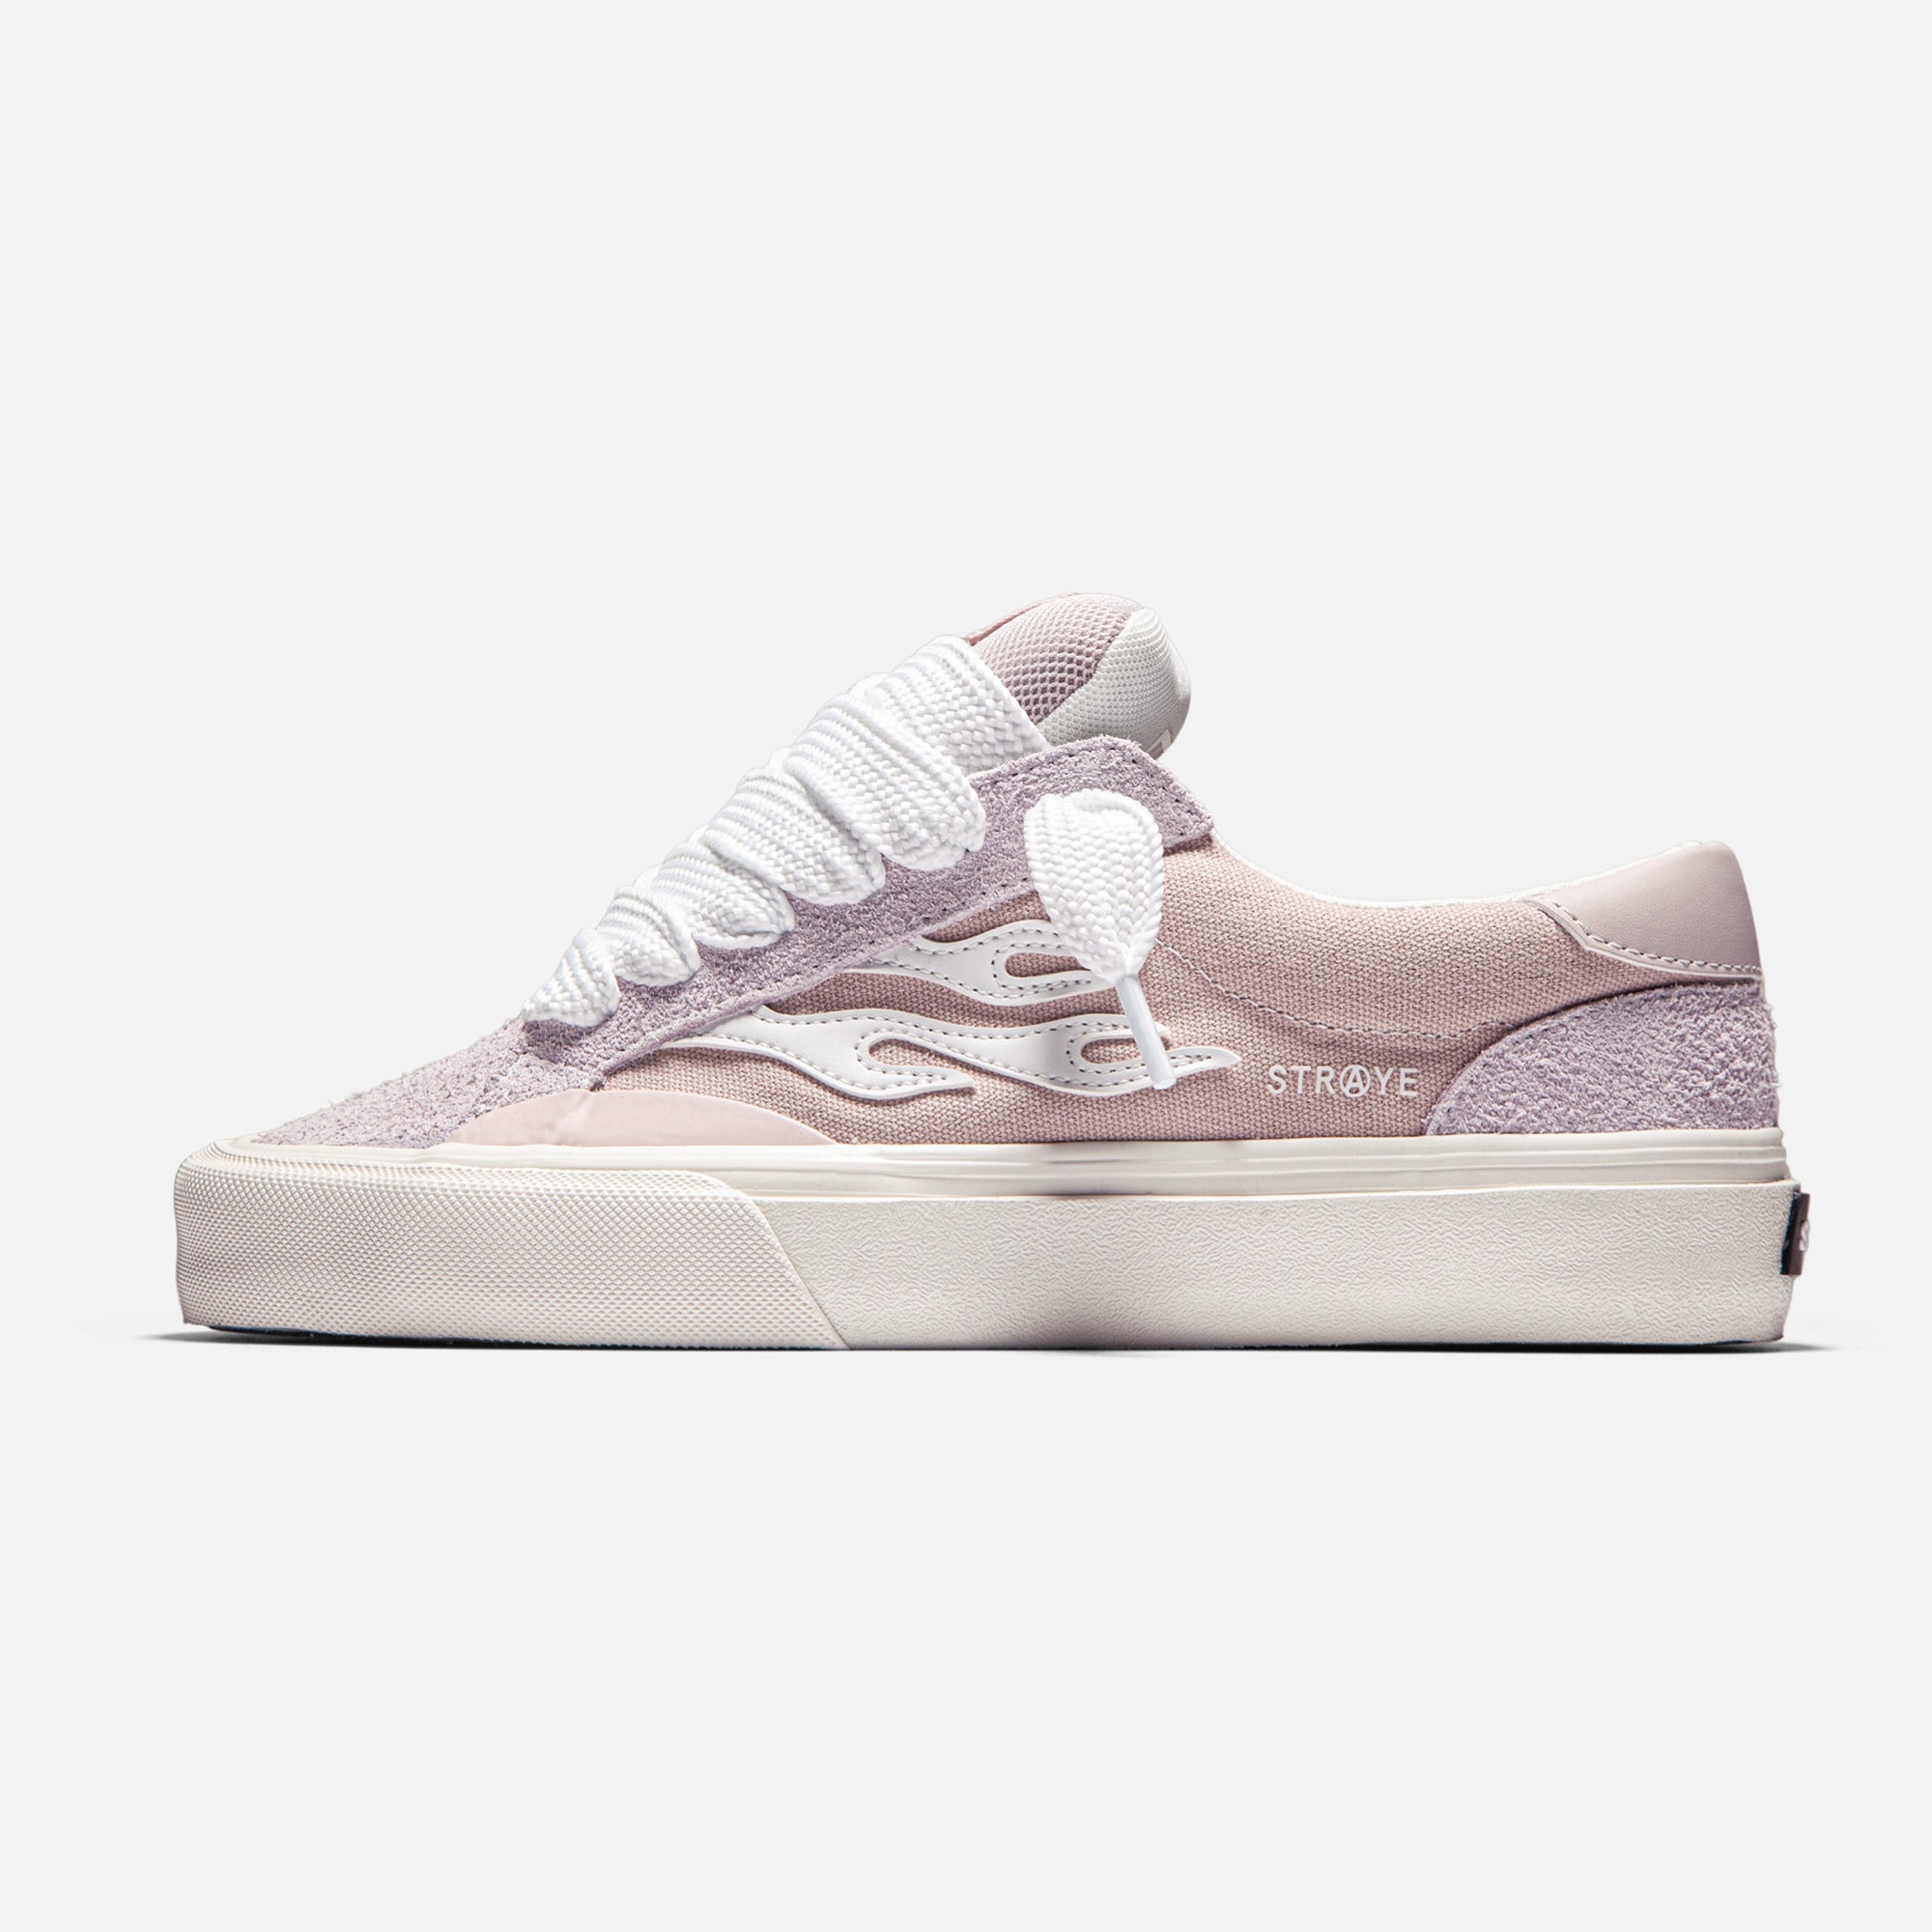 LOGAN PUFF - DUSTY PINK | SIDE VIEW